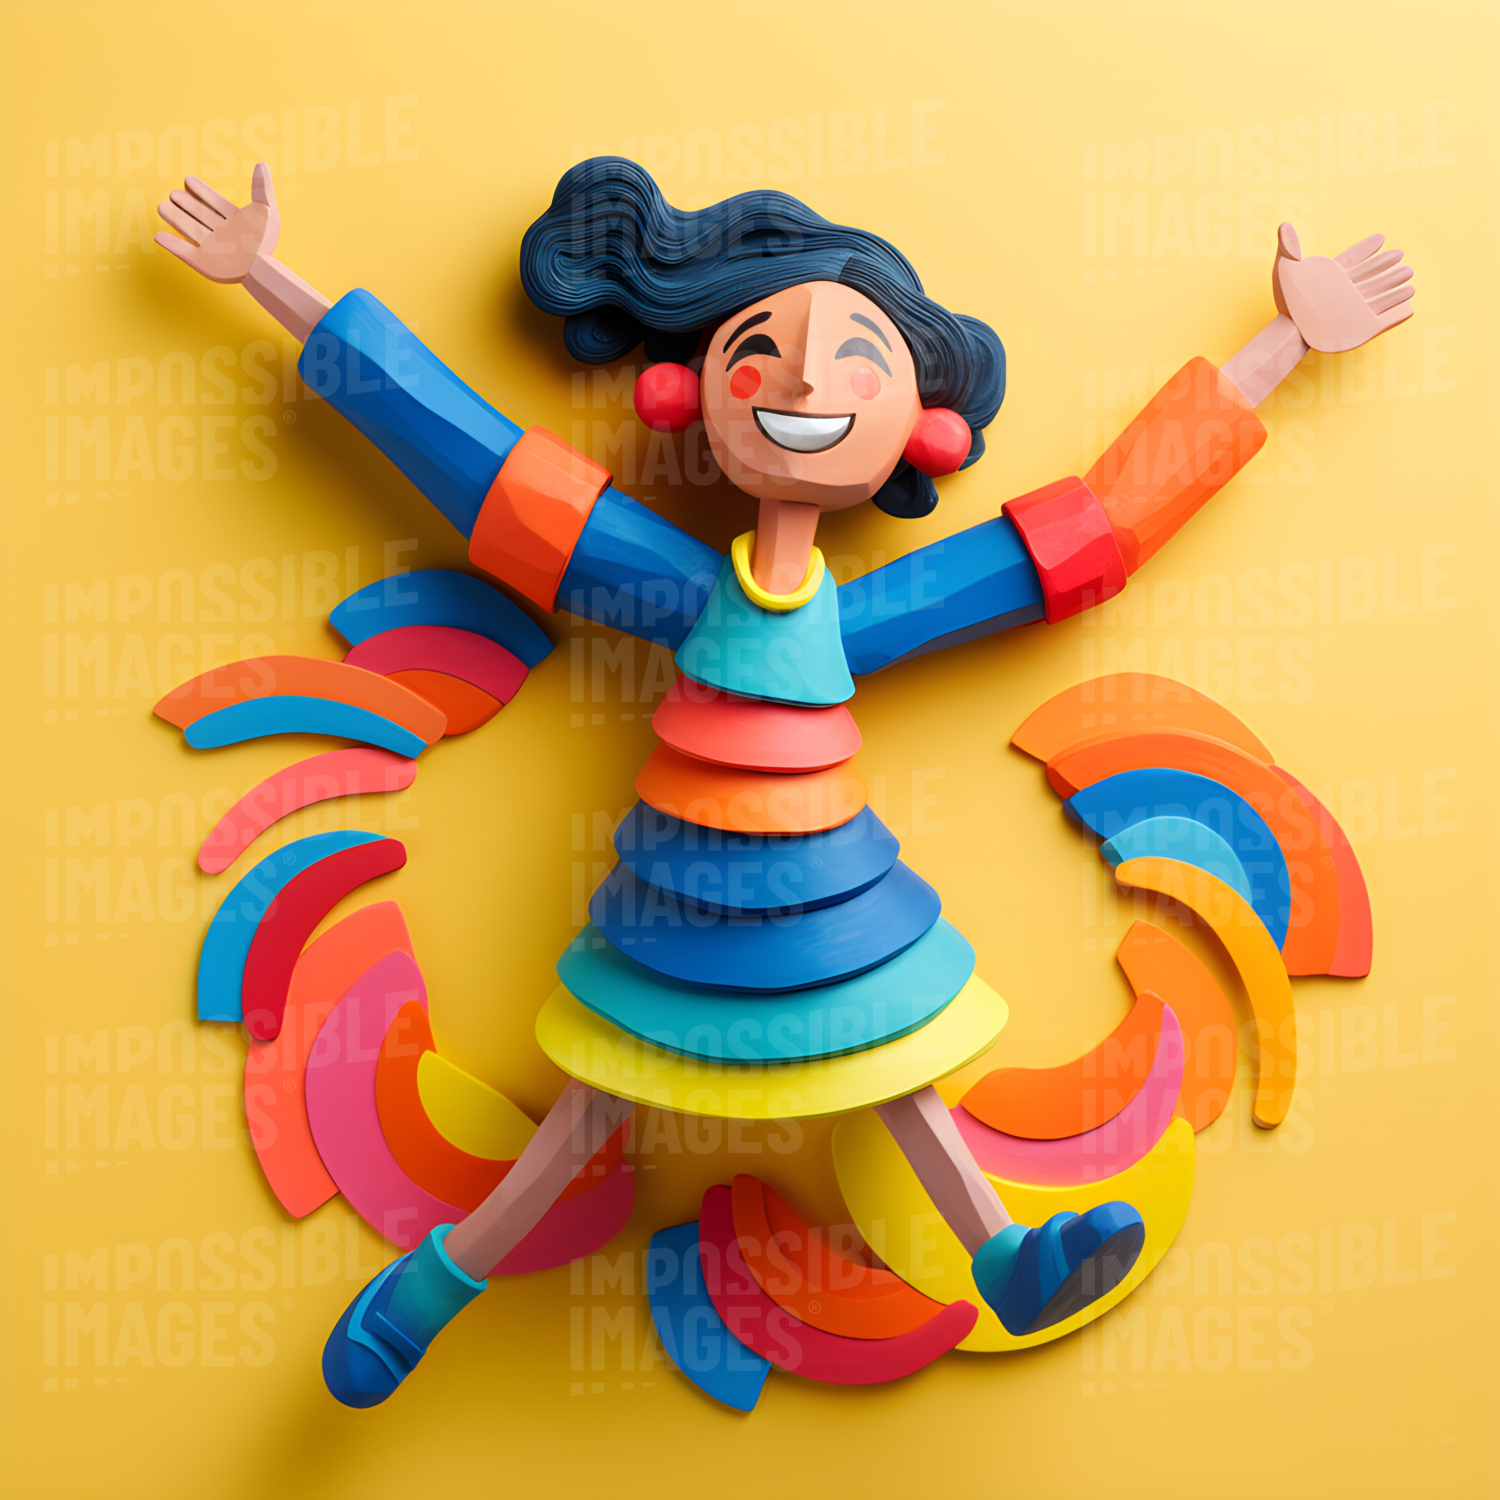 Happy clay model of a colourful lady